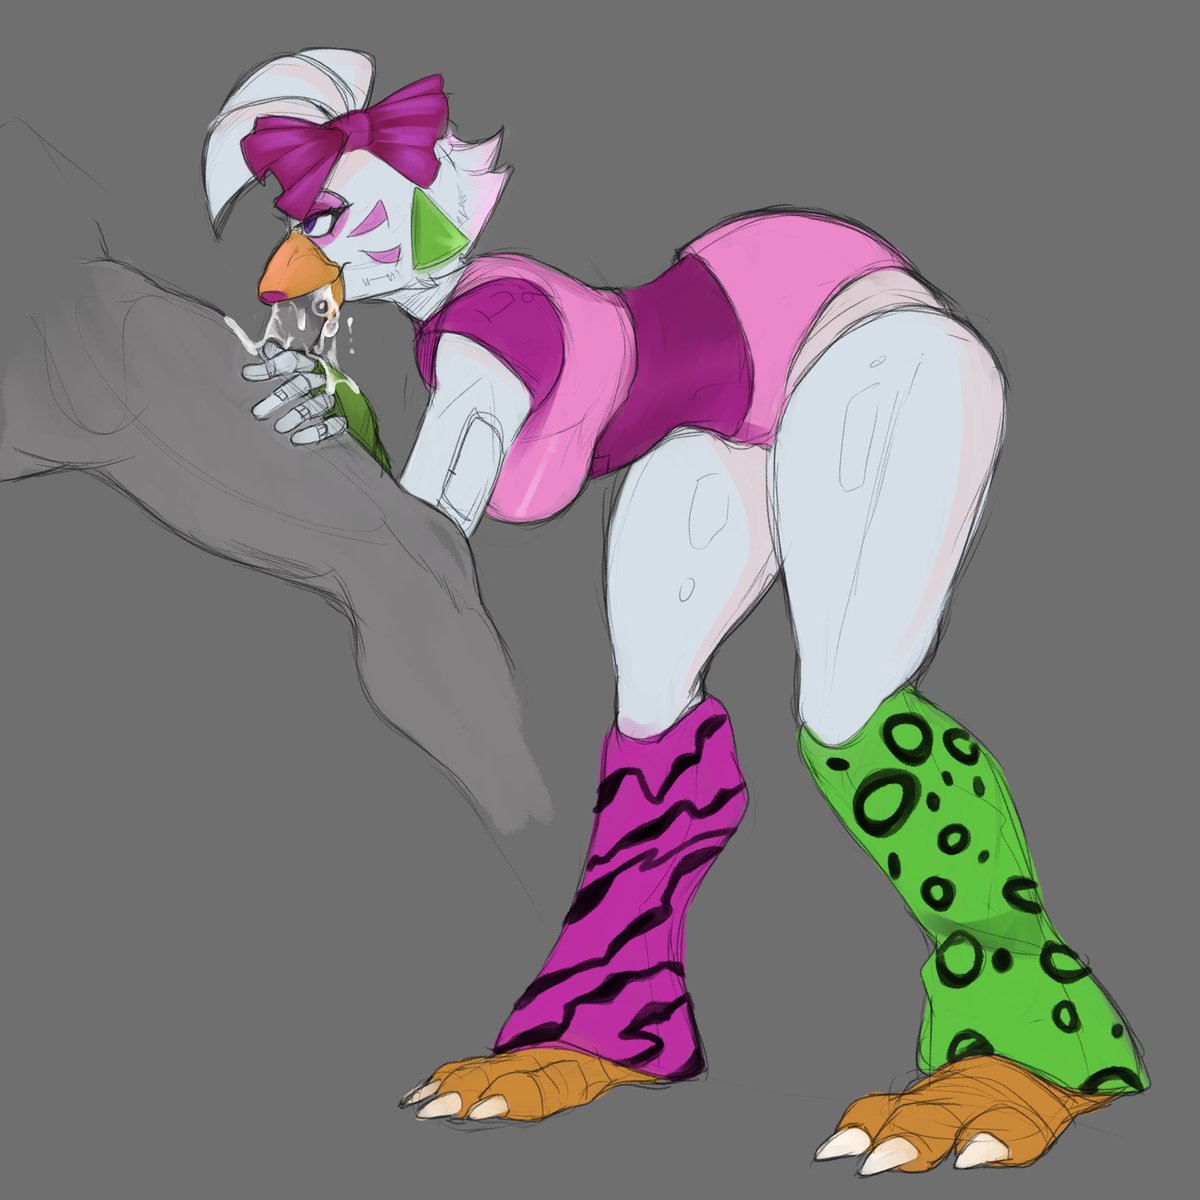 I drew the other girl and now I have the idea that Glam rock Chica gives pe...